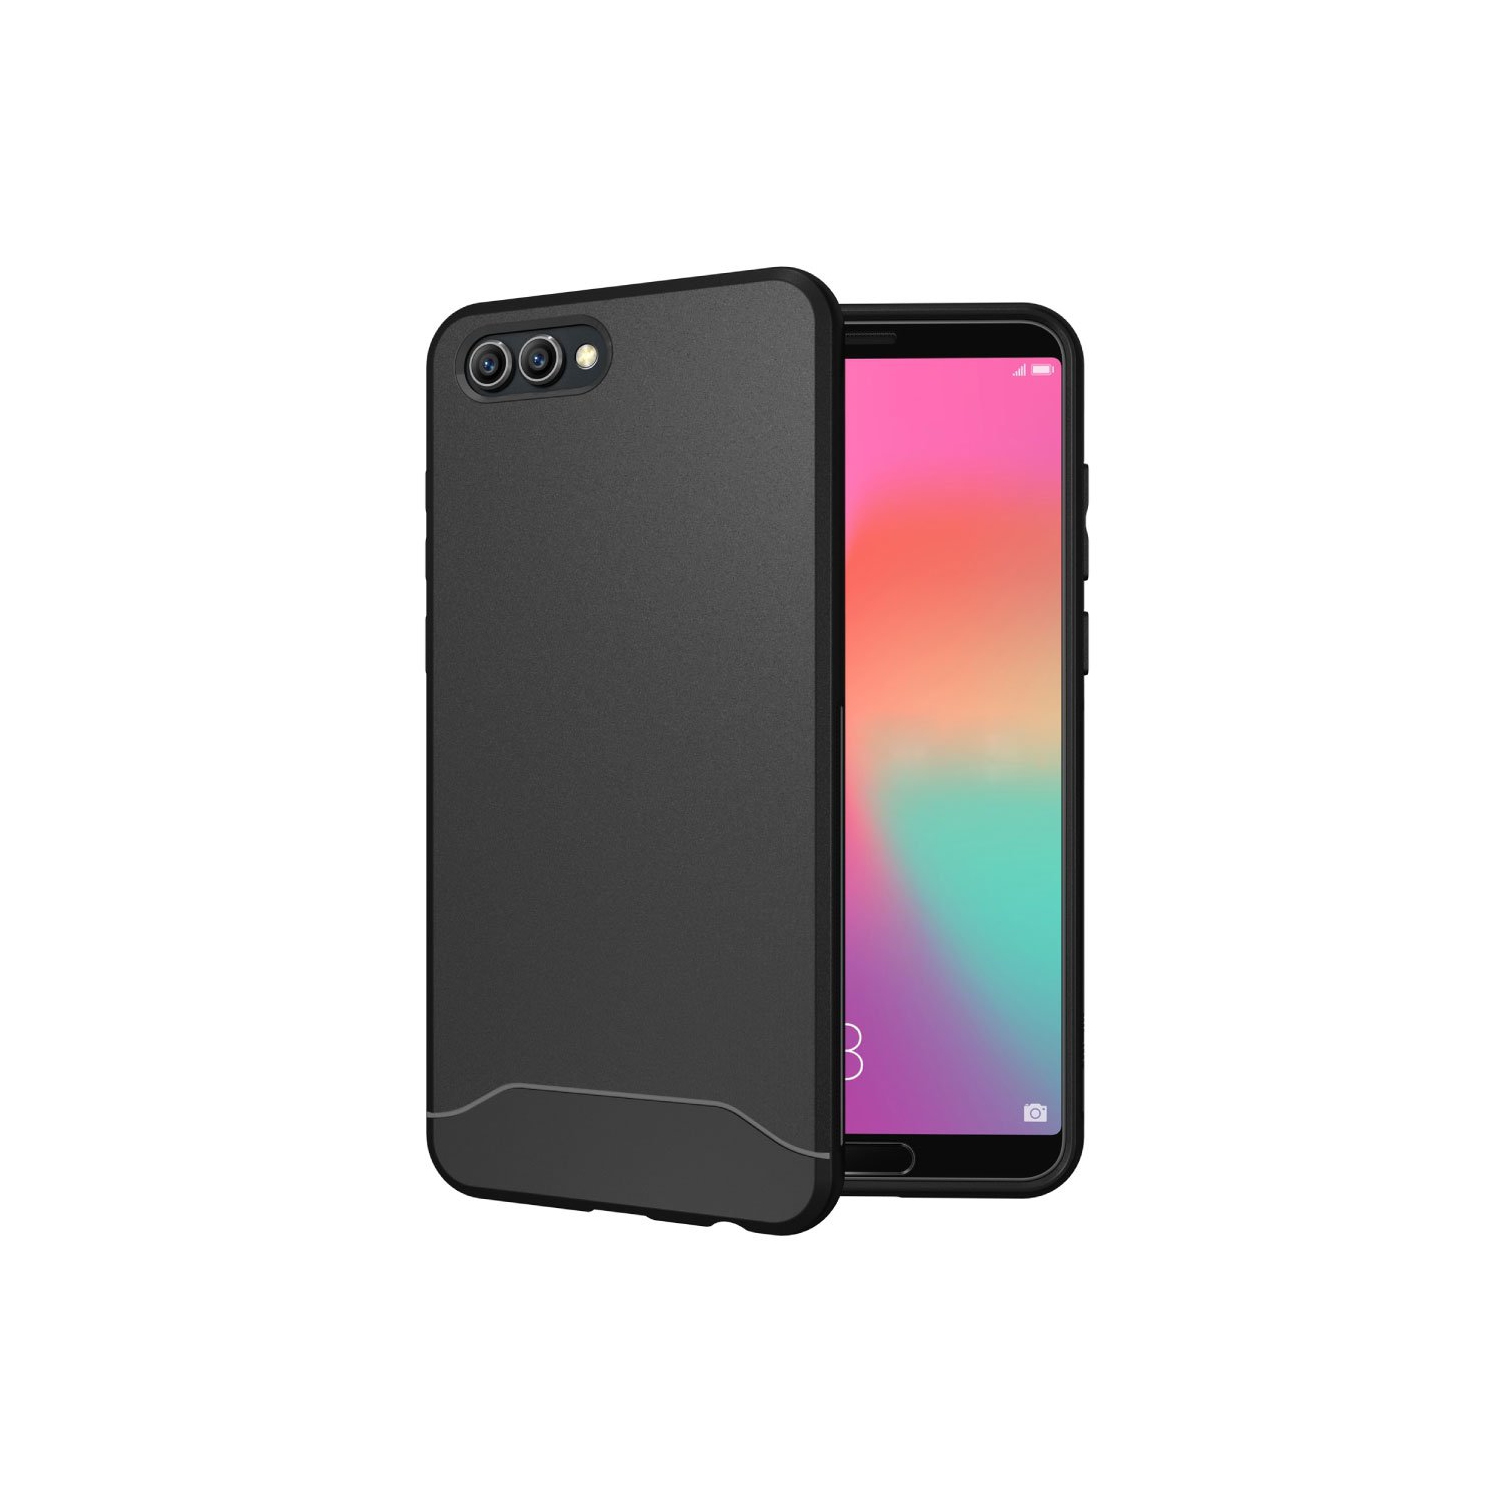 Honor View 10 Case, TUDIA Full-Matte Lightweight [Arch S] TPU Bumper Shock Absorption Cover for Huawei Honor View 10 (Black)